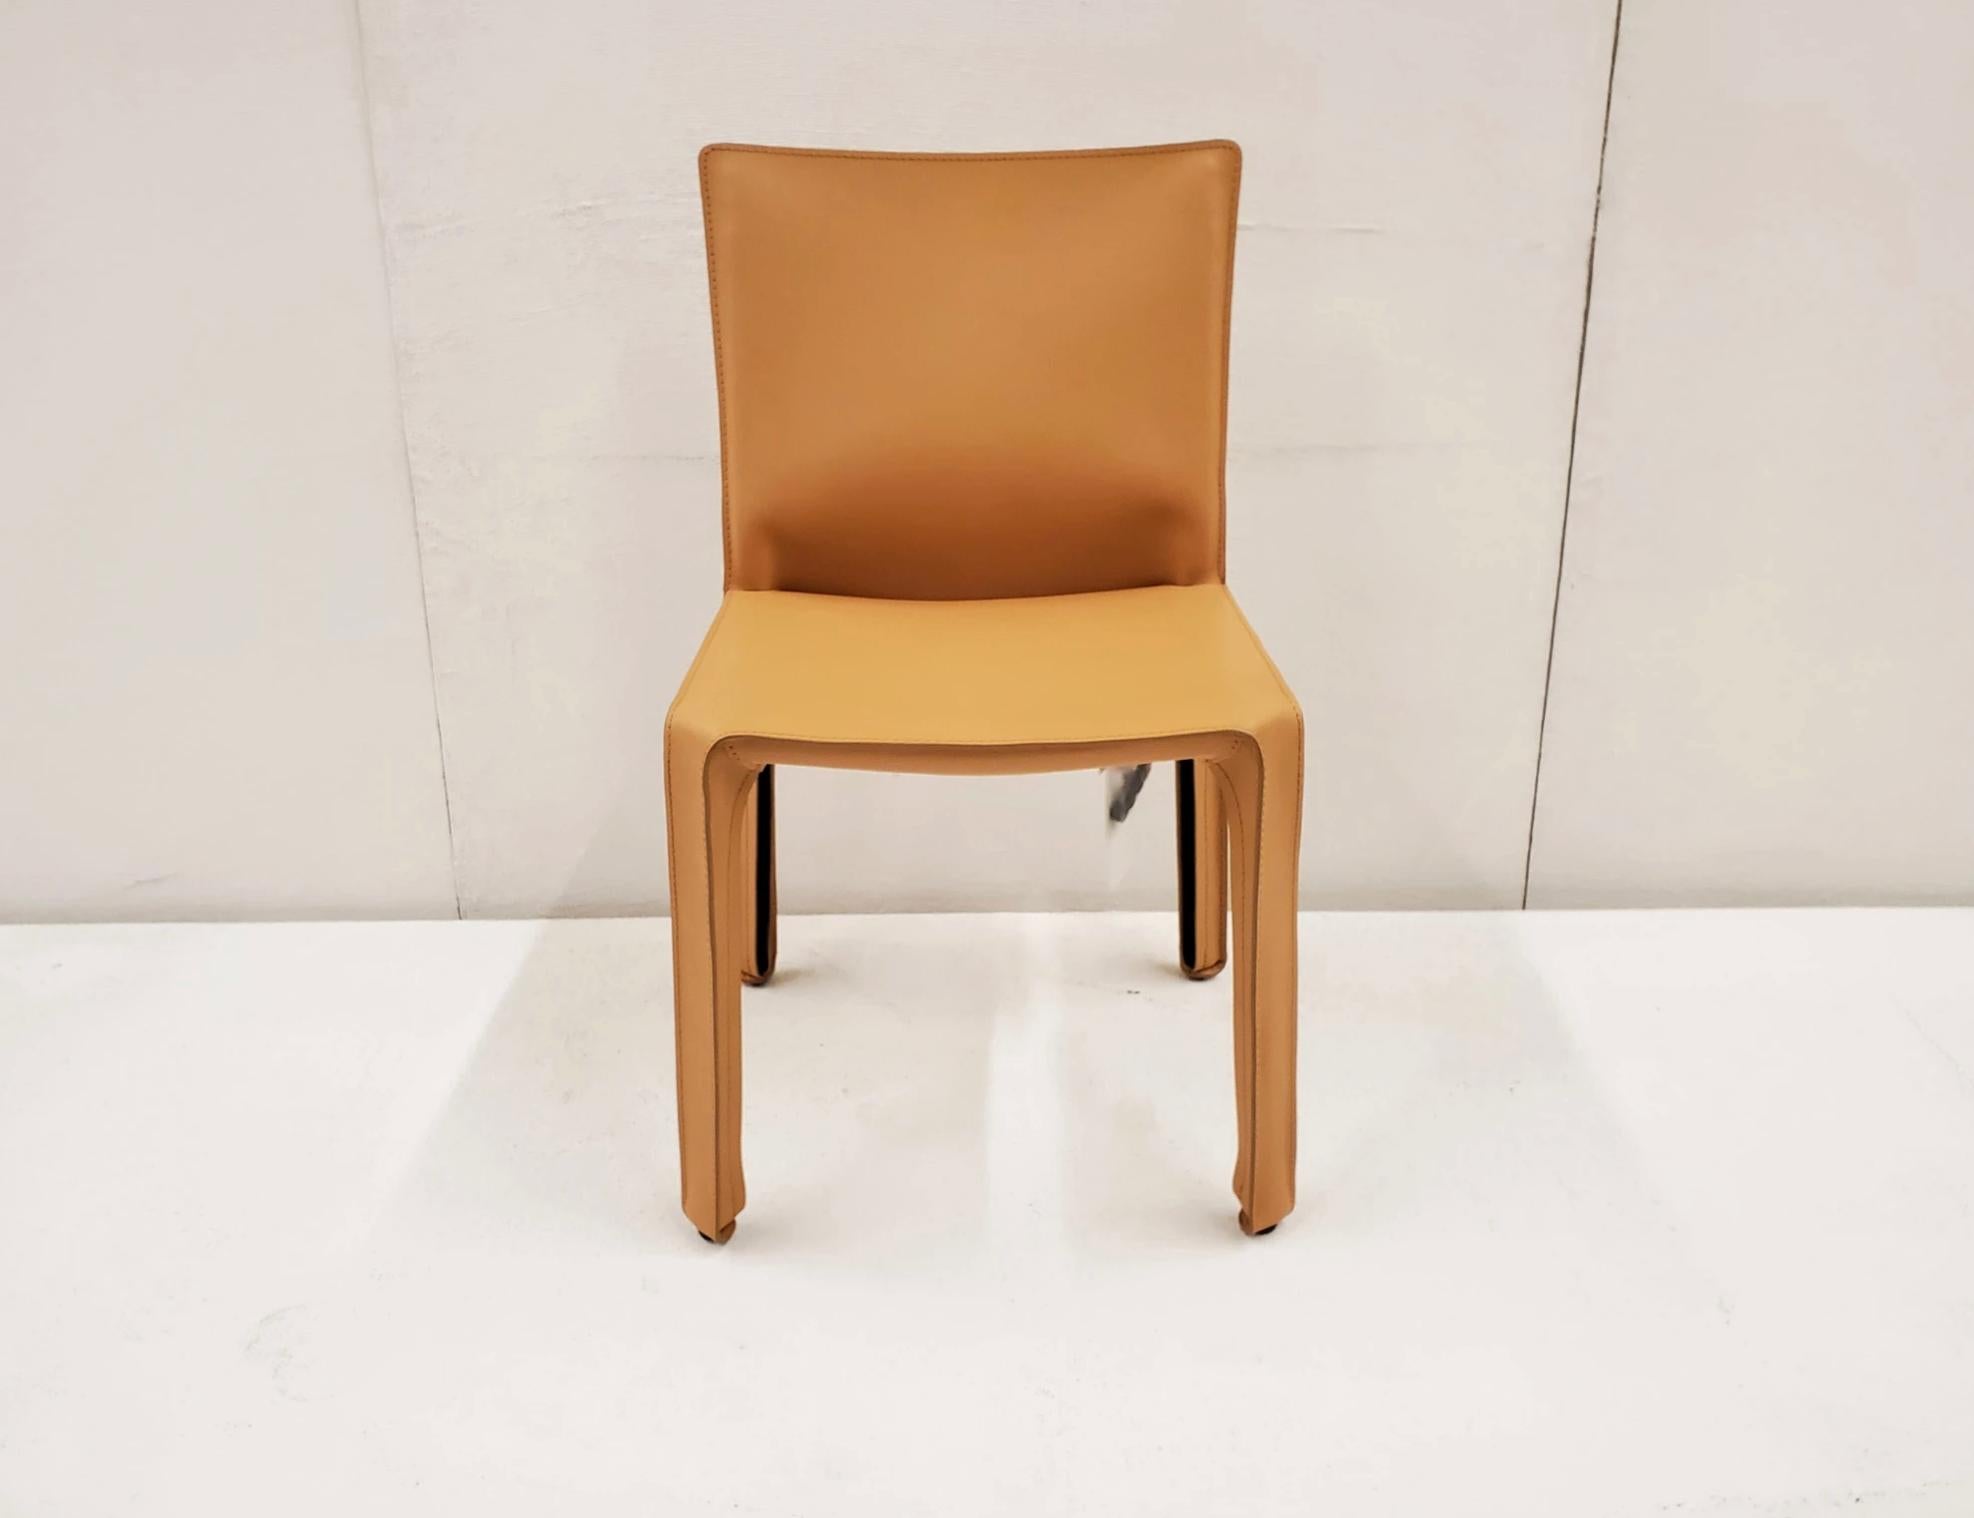 Italian Cab chair by Mario Bellini for Cassina in Natural Leather (set of 6)